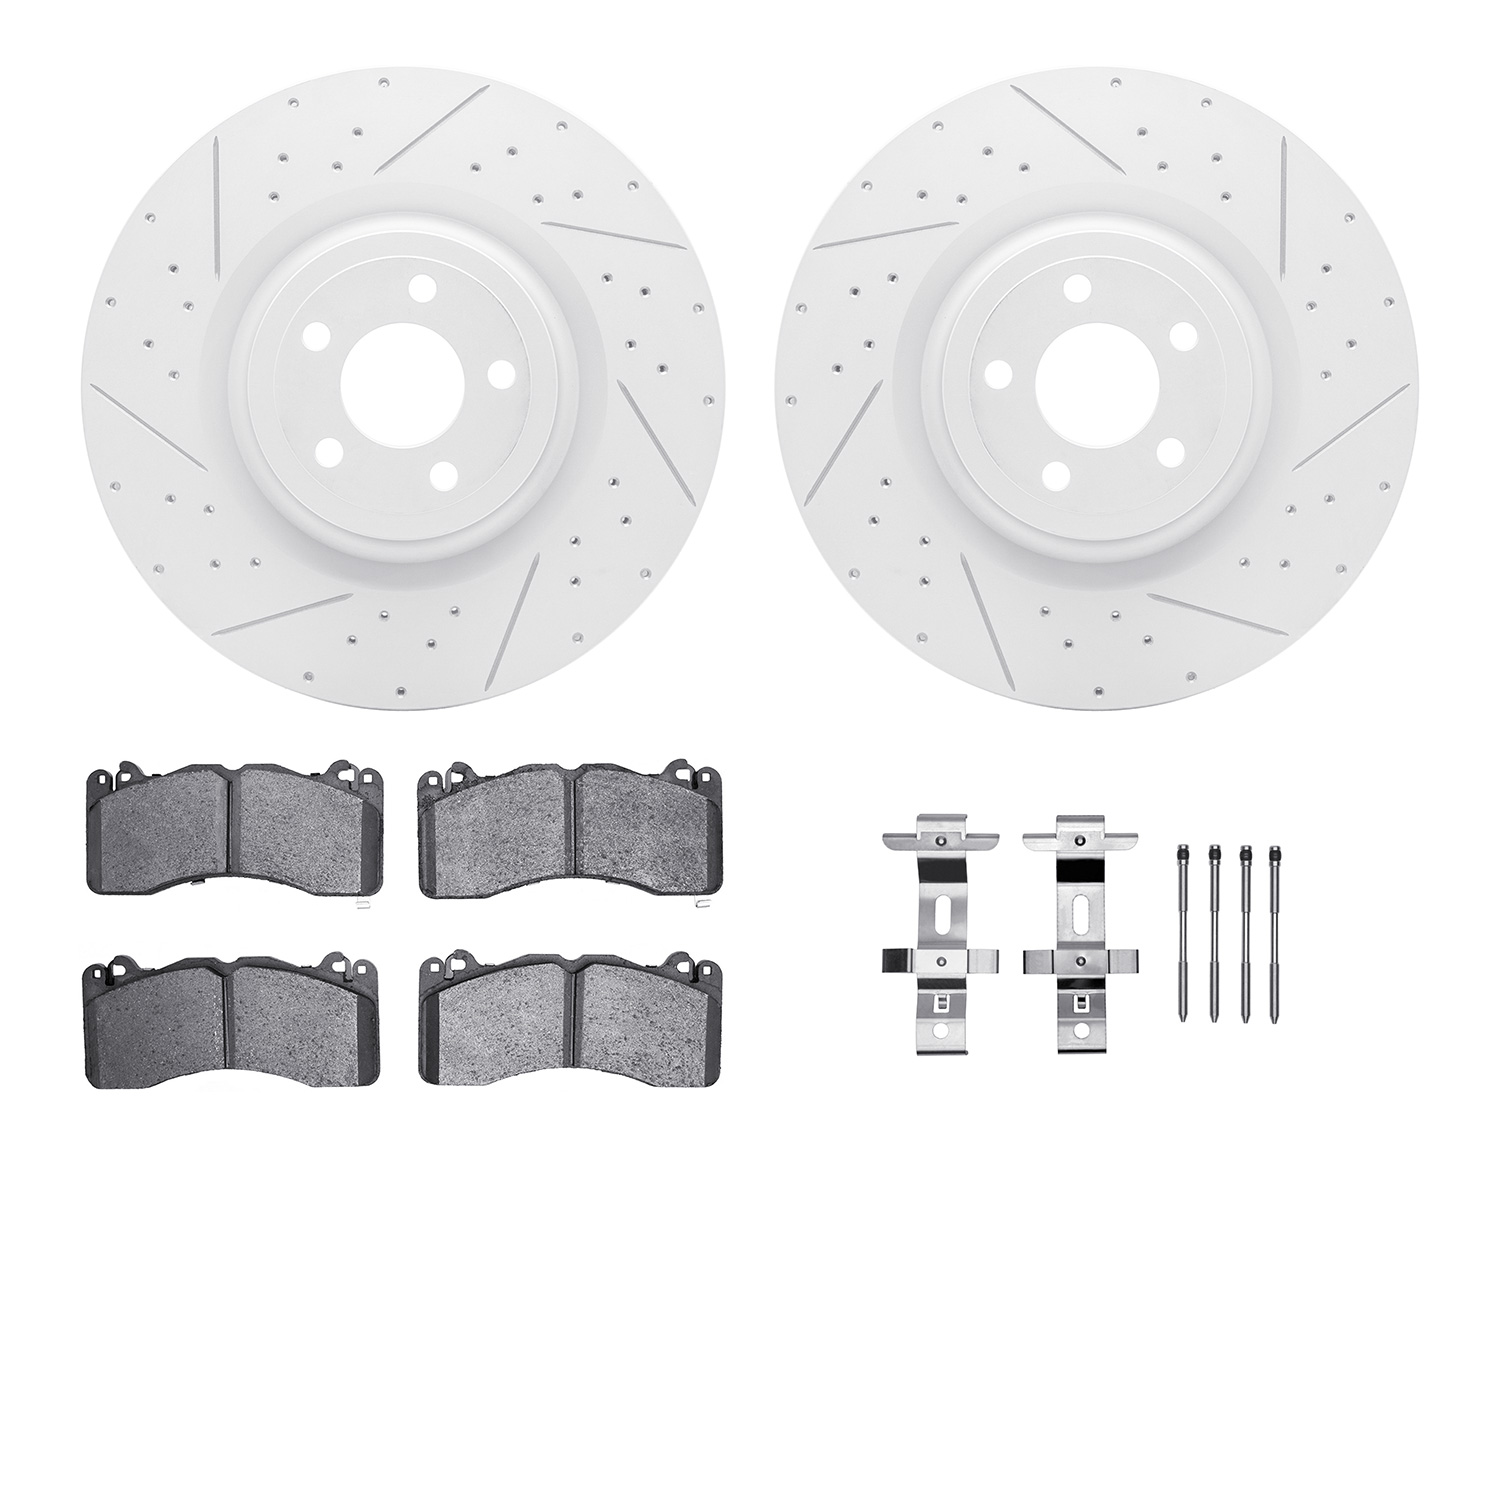 2512-54371 Geoperformance Drilled/Slotted Rotors w/5000 Advanced Brake Pads Kit & Hardware, Fits Select Ford/Lincoln/Mercury/Maz